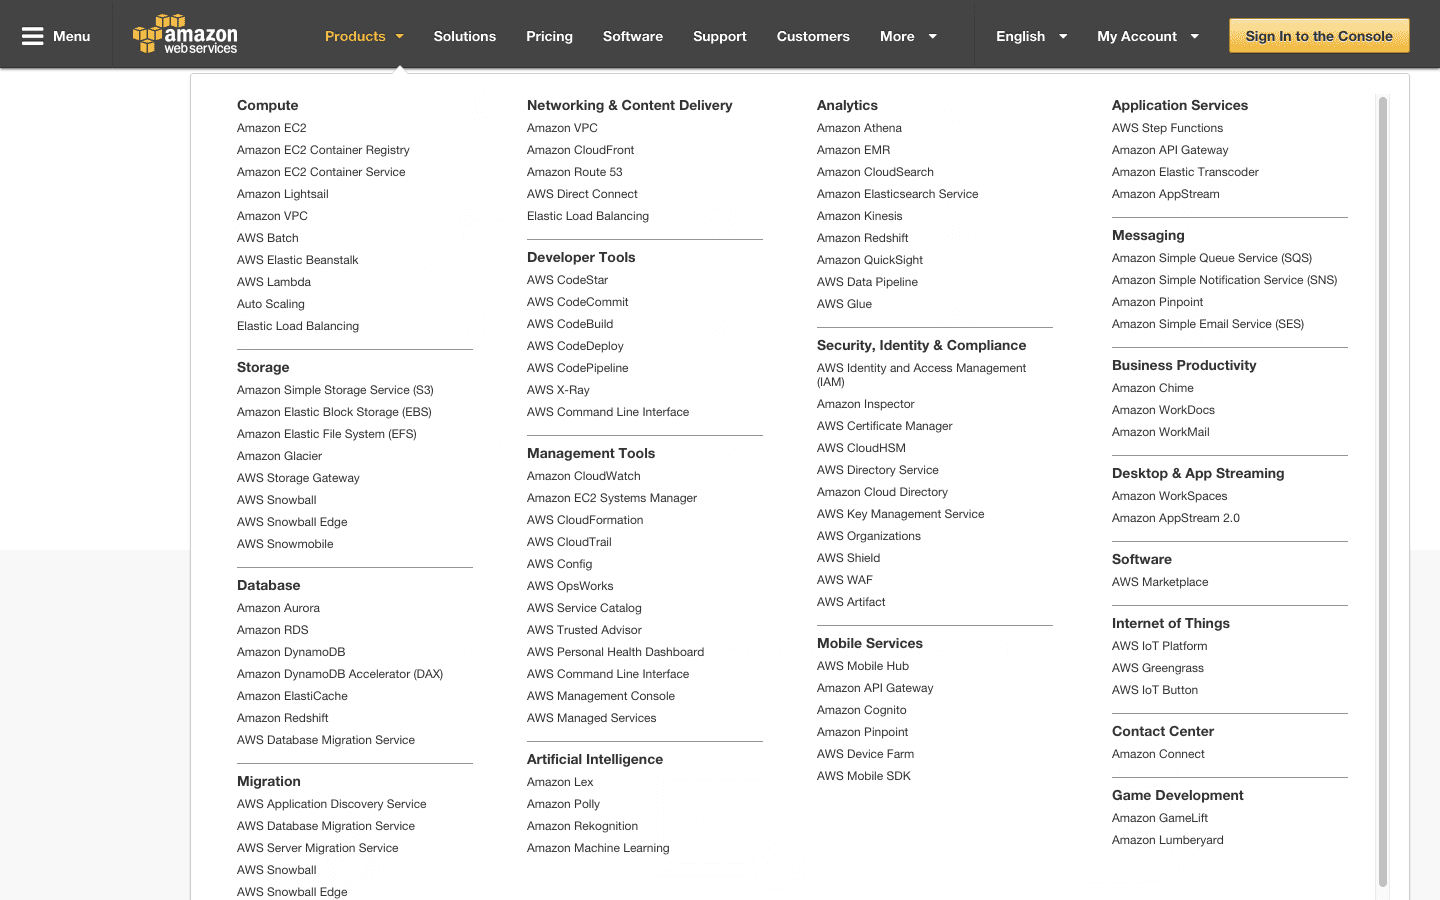 List of AWS services